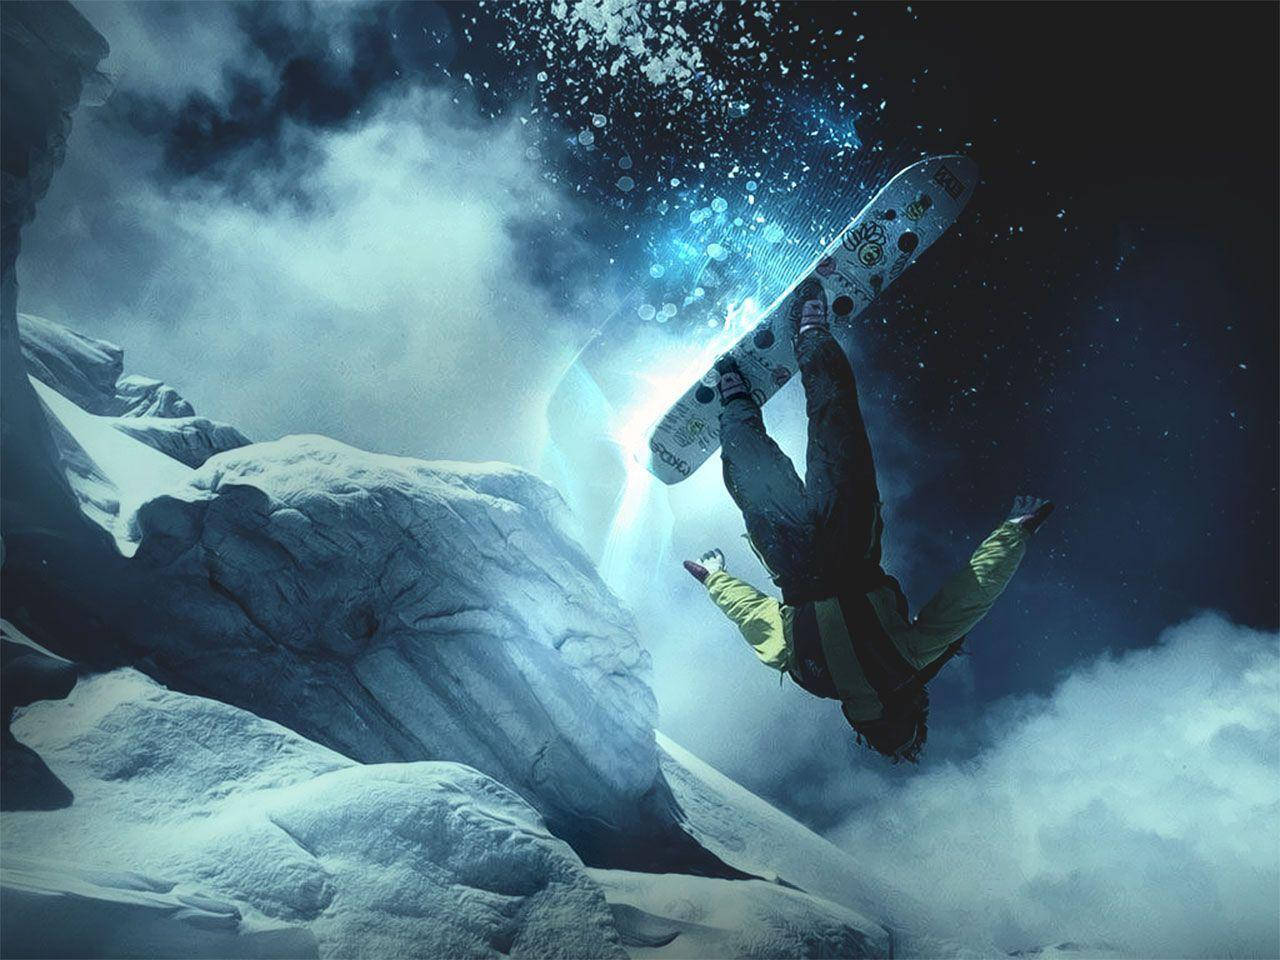 Man In Yellow Does Flip With A Snowboard Wallpaper